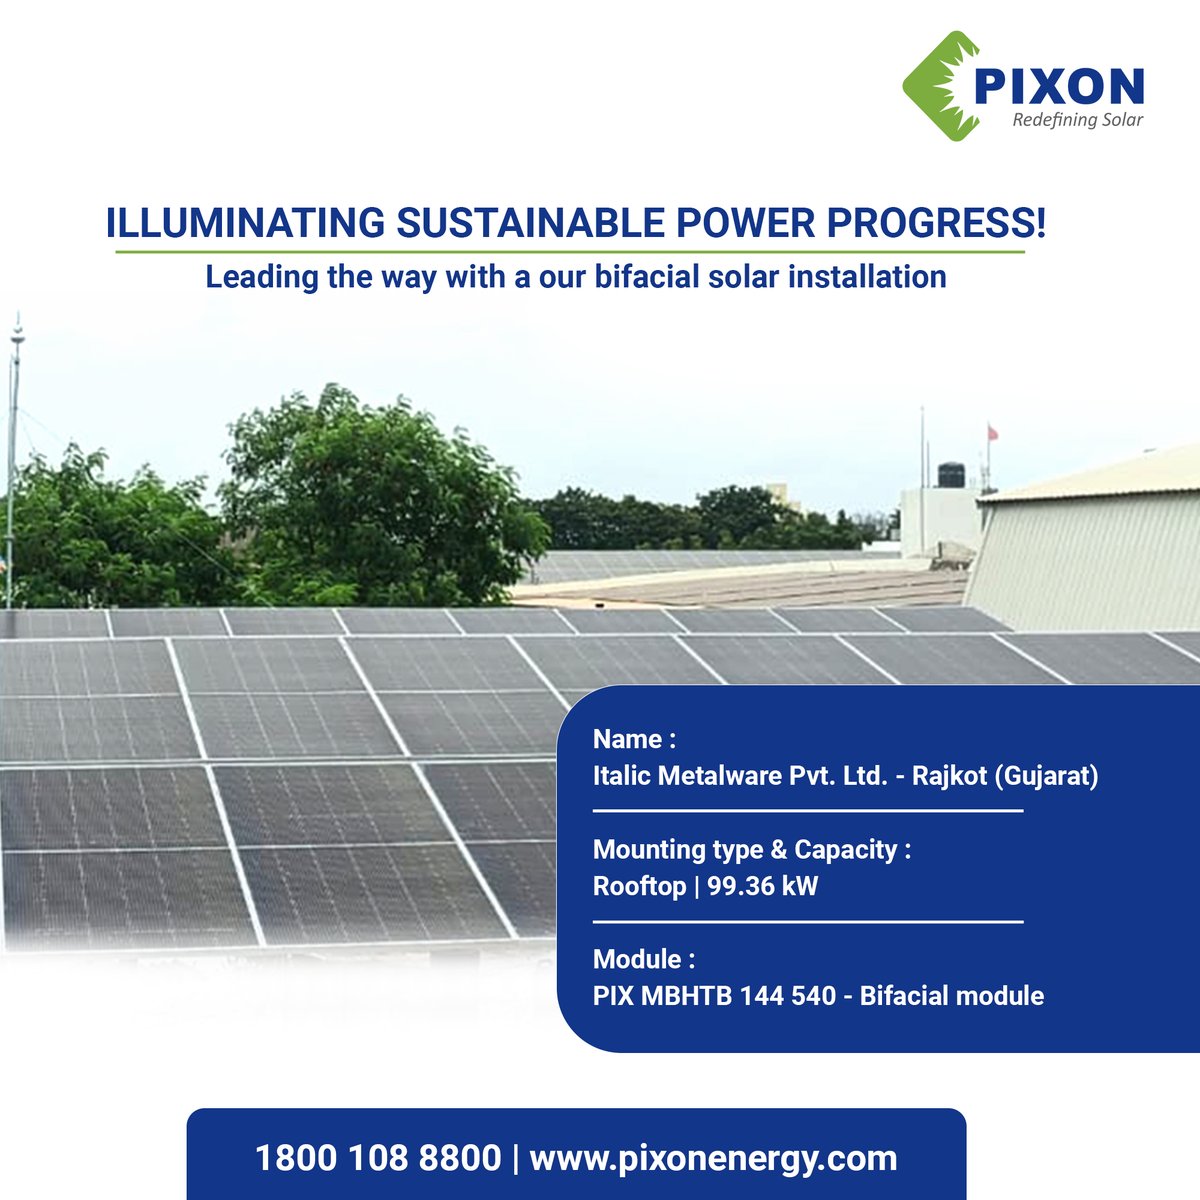 Transforming sunlight into saving!
We're elated to announce the completion of our latest rooftop project - a 99.36 kW bifacial #solarinstallation for Italic Metalware Pvt. Ltd.

#pixonsolar #projectcompletion #solarpower #modulemanufacturer #solarmodule #solarpanels #solarenergy